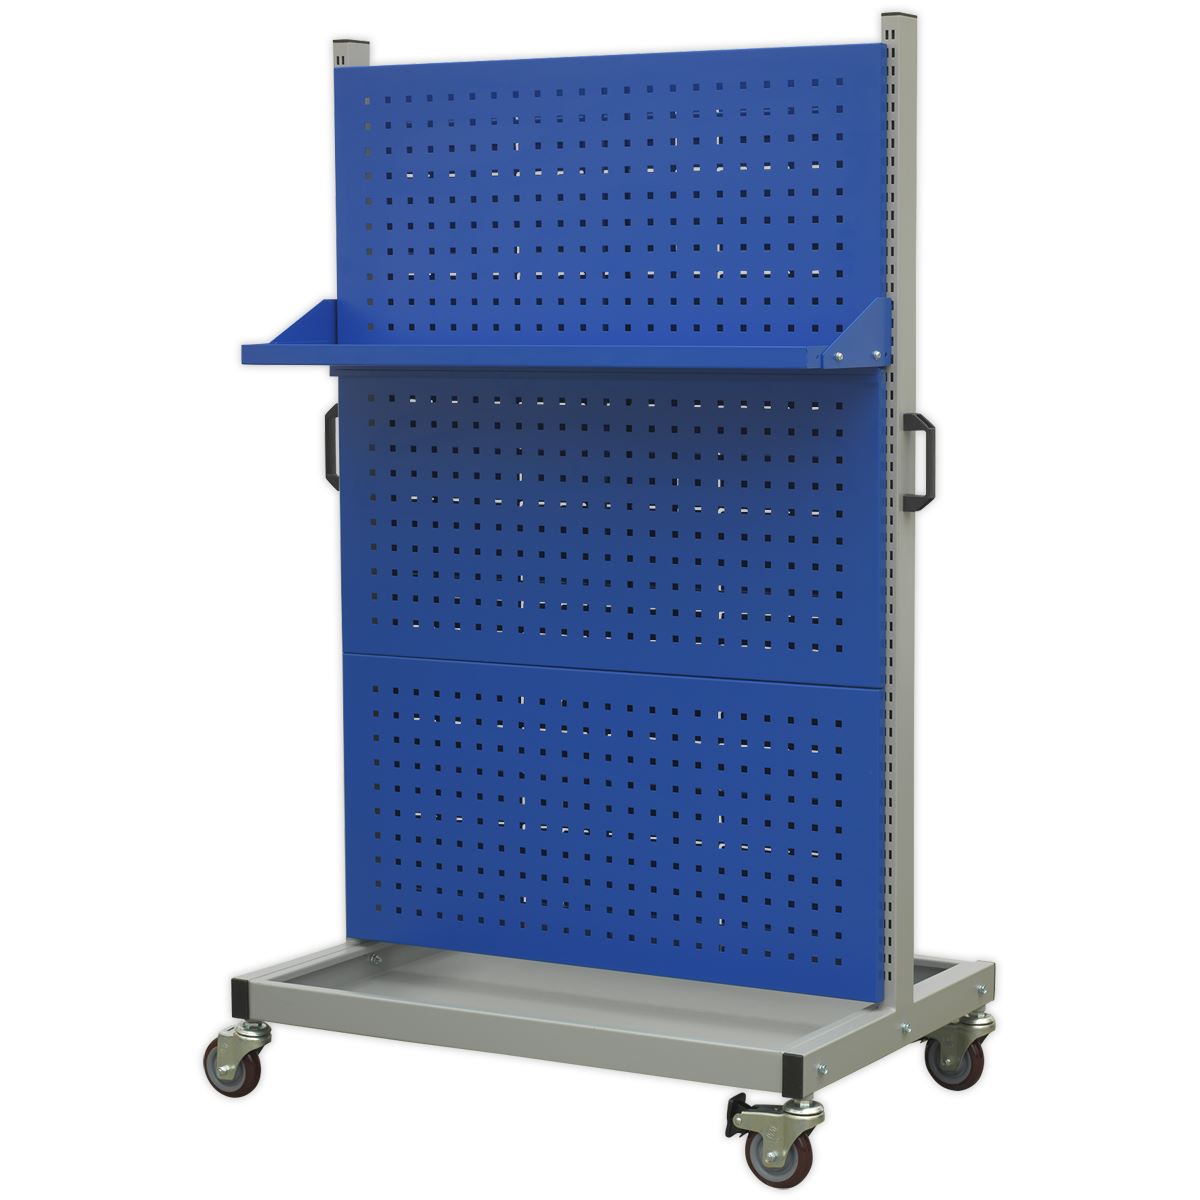 Sealey Premier Industrial Industrial Mobile Storage System with Shelf